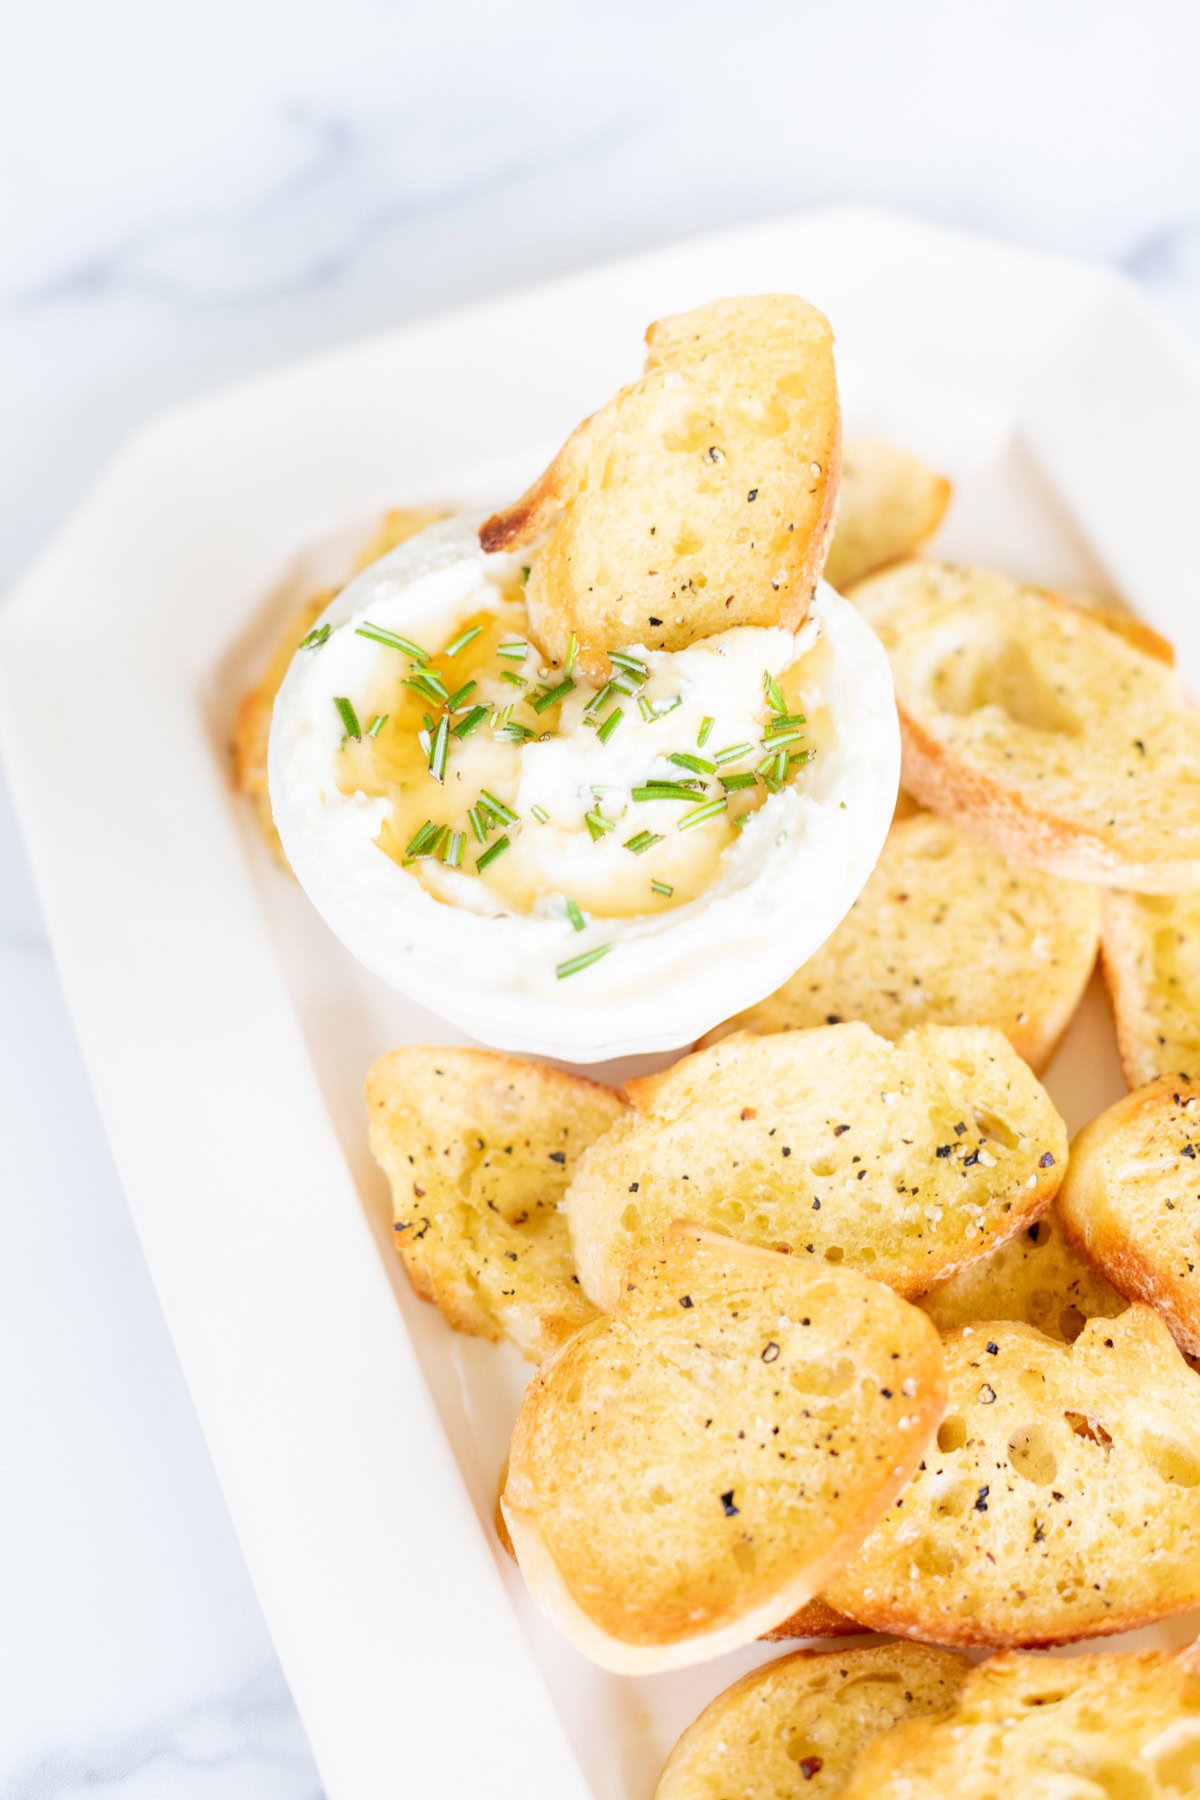 A white dish with a round dip bowl filled with creamy dip topped with chopped herbs and a drizzle of oil, accompanied by multiple toasted crostini on a rectangular white platter.